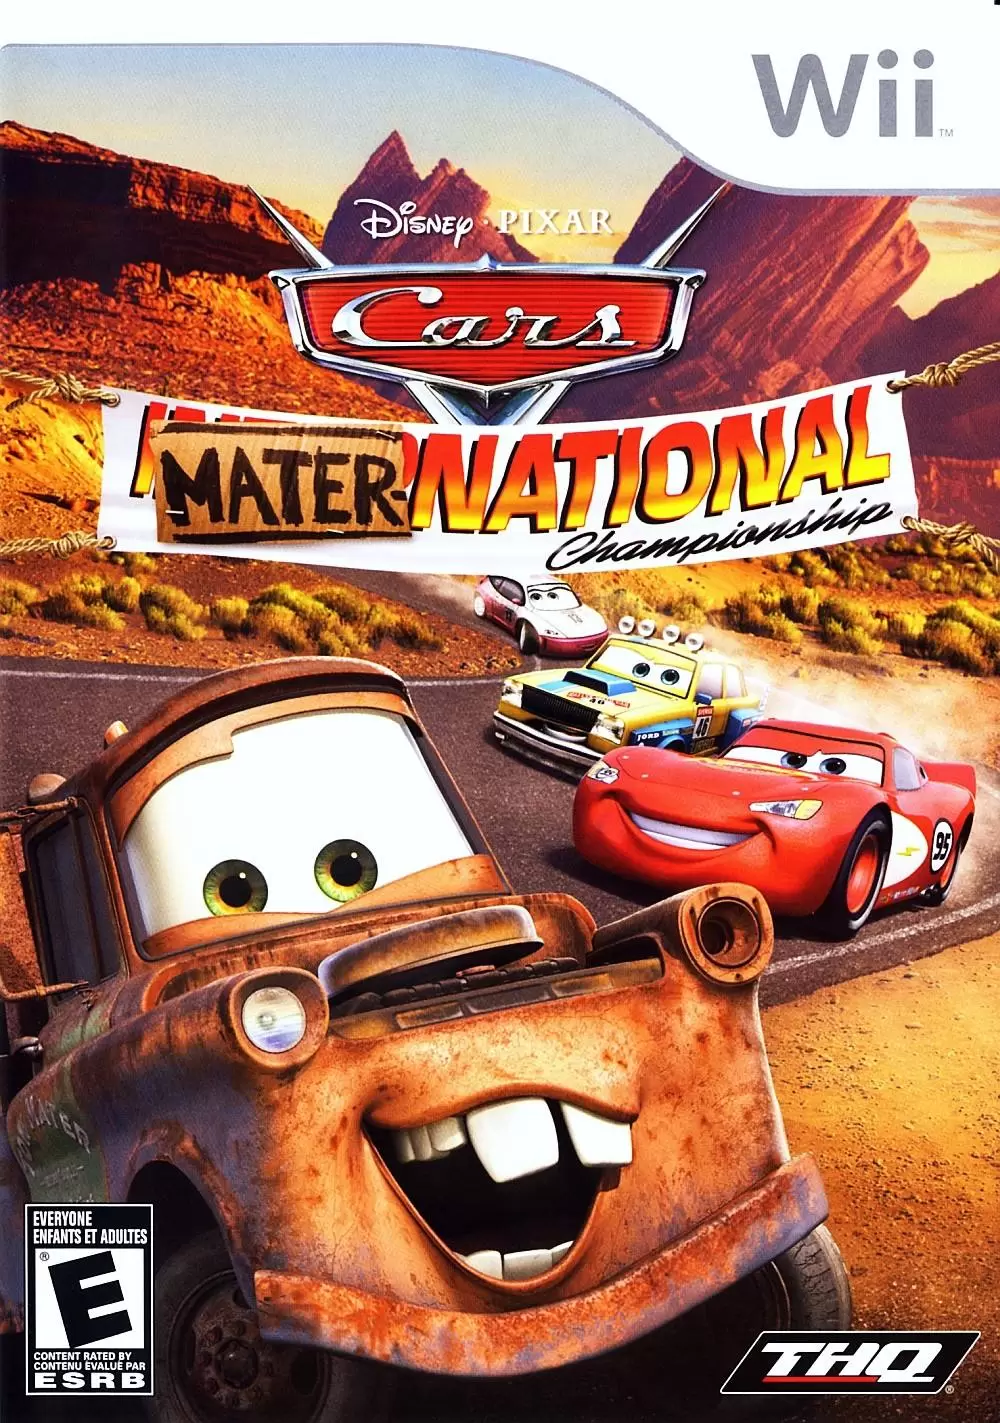 Nintendo Wii Games - Cars: Mater-National Championship